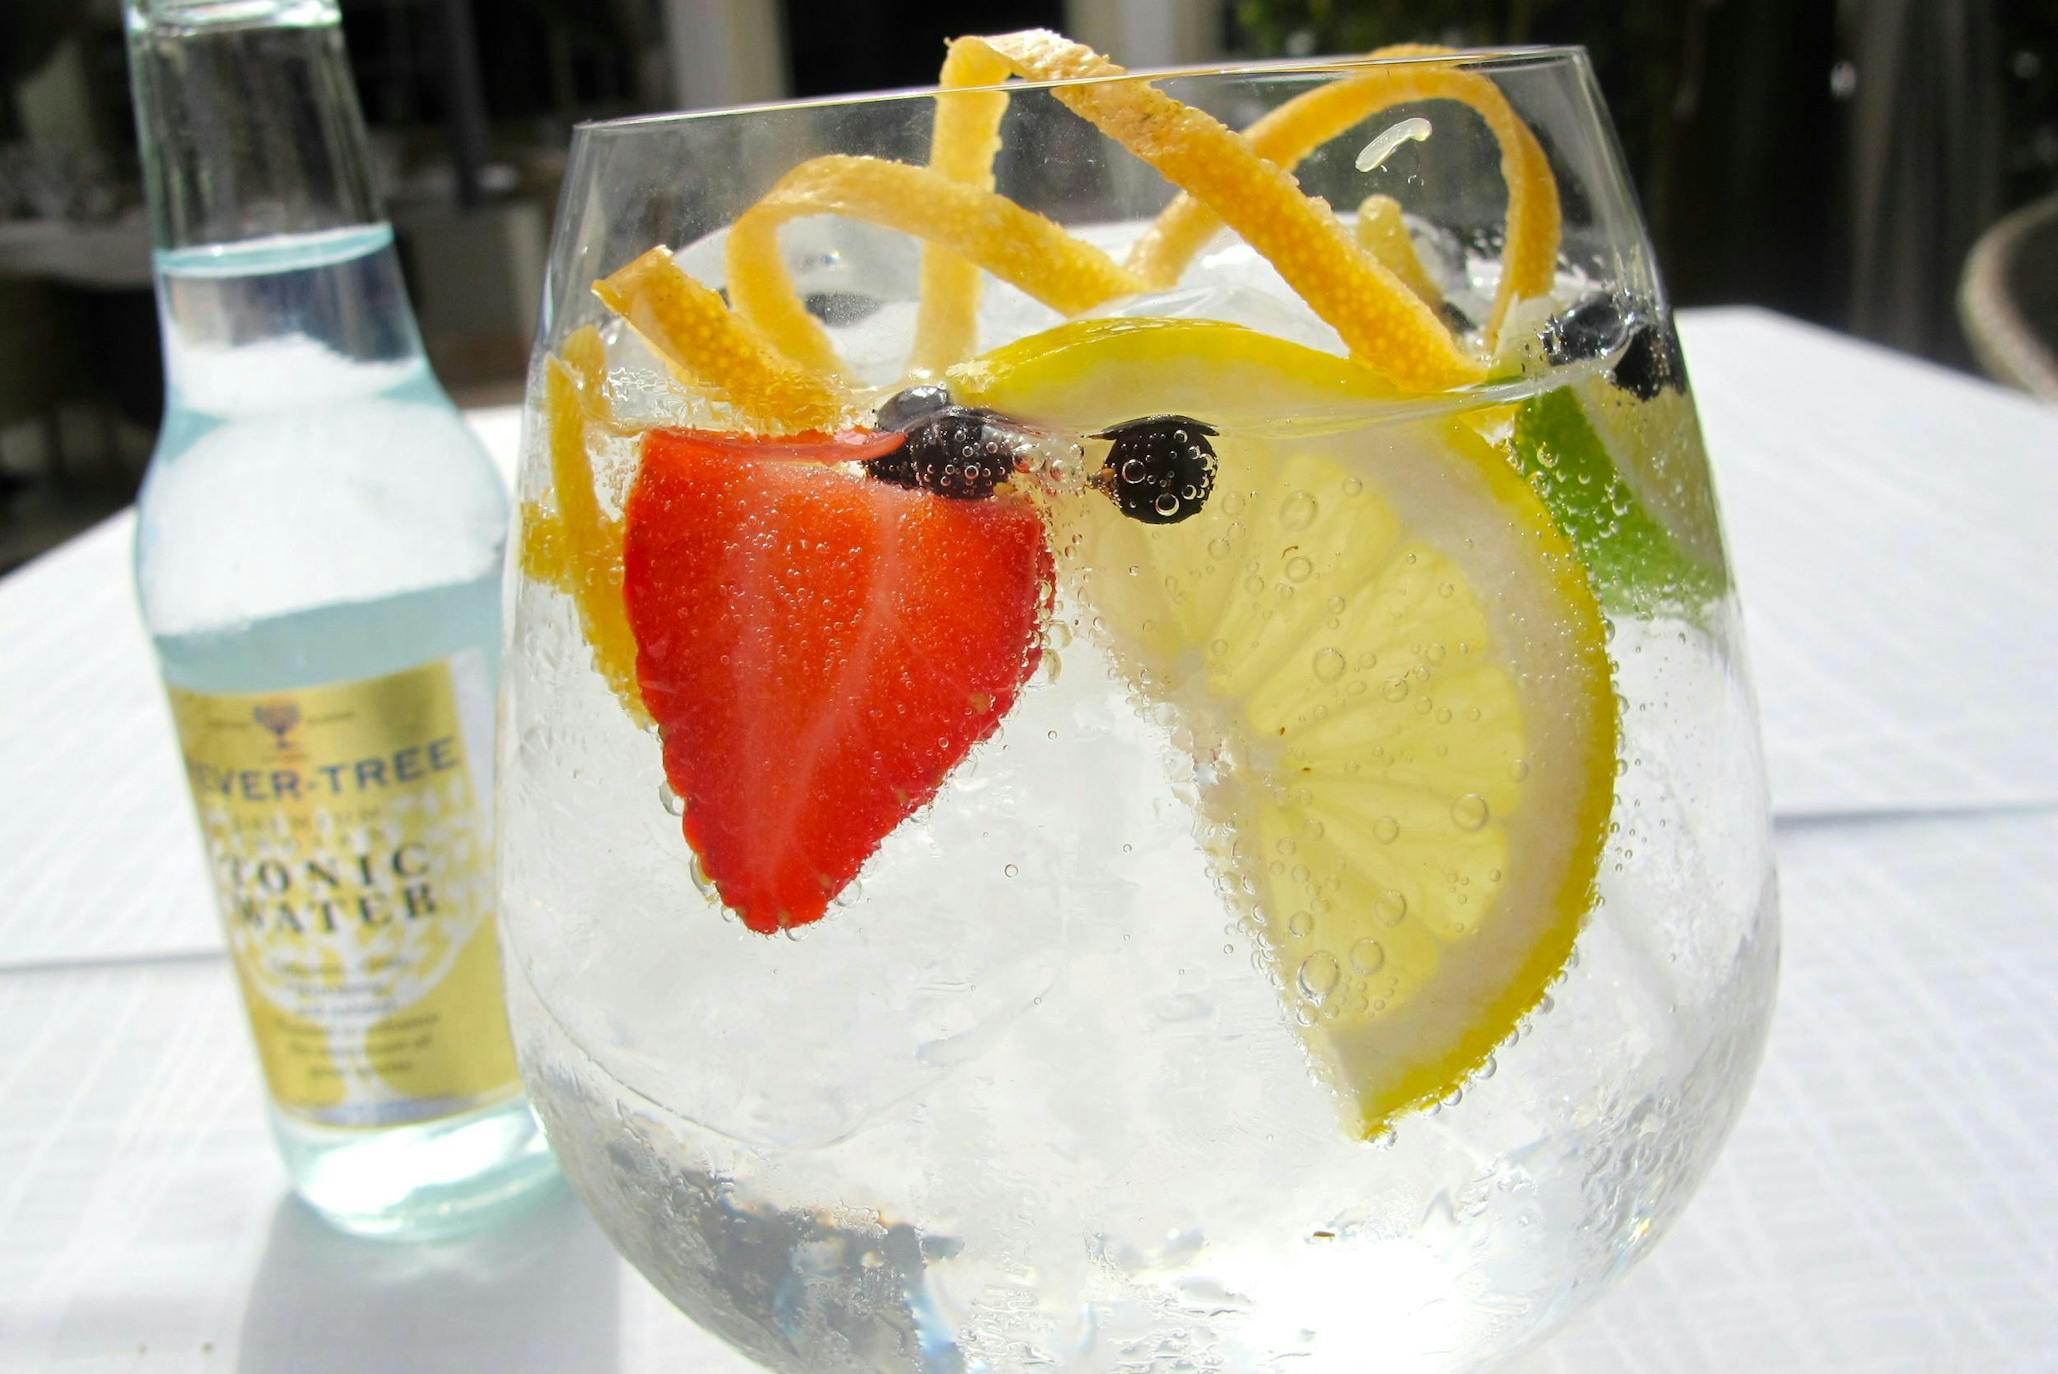 The winners of the Win a Year of G&T contest with the Craft Gin Club and Fever-Tree Mixers